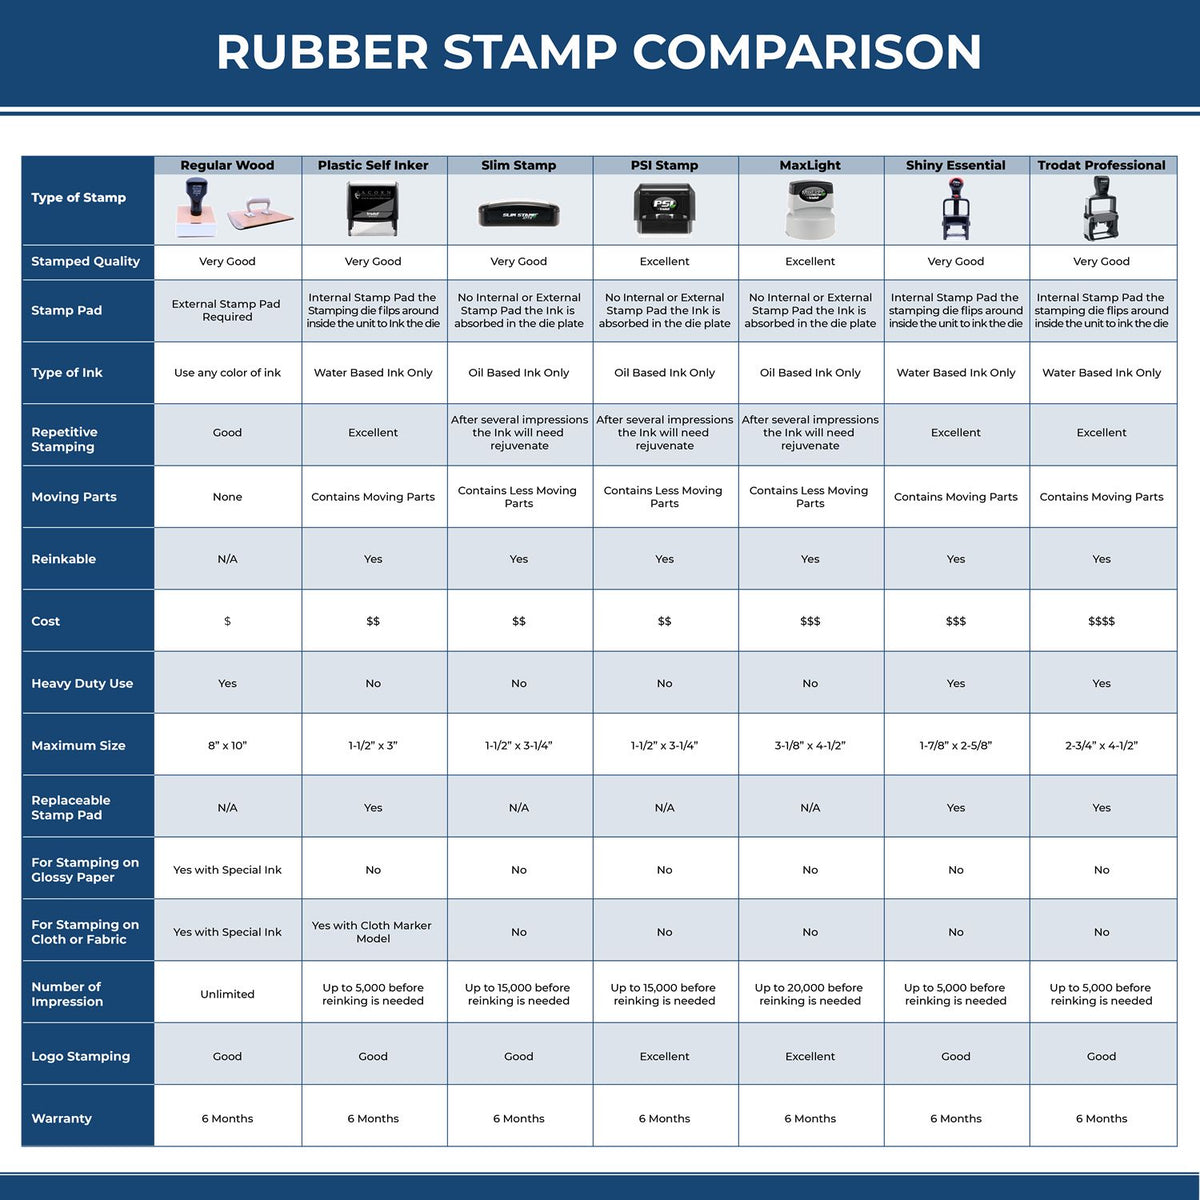 A comparison chart for the different types of mount models available for the MaxLight Premium Pre-Inked Maryland Rectangular Notarial Stamp.